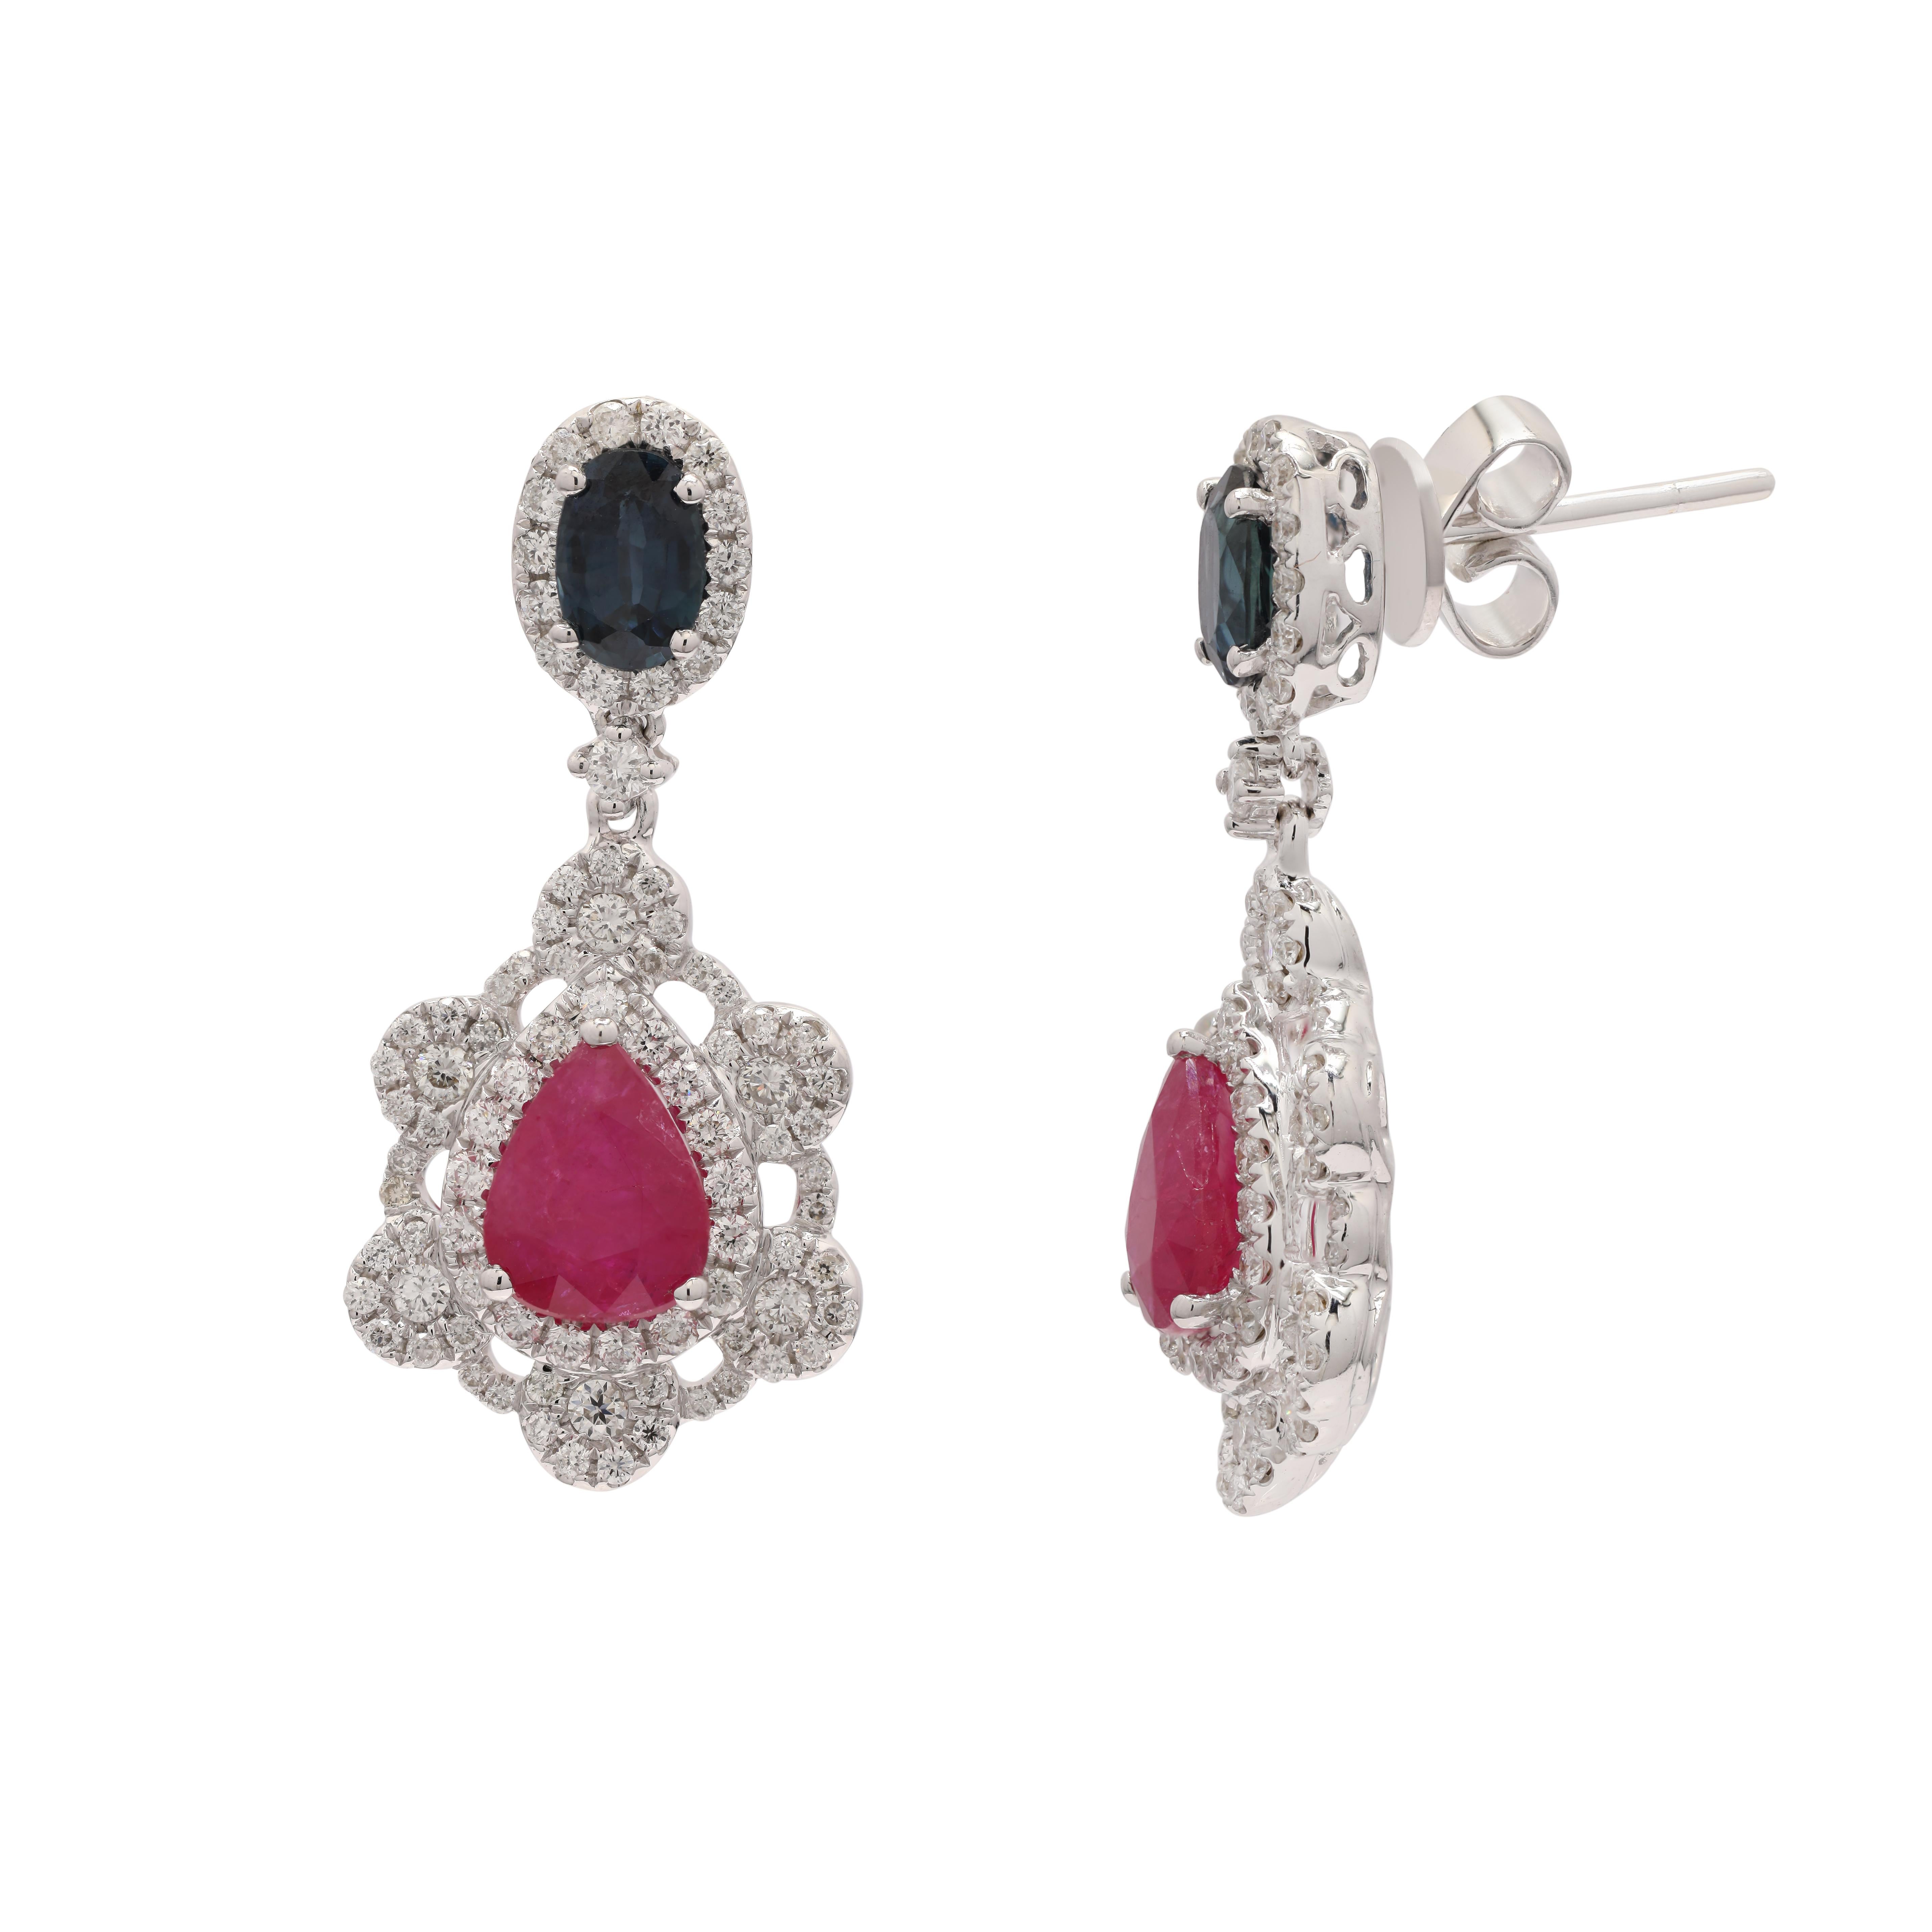 Art Deco 3.85 Carat Blue Sapphire Ruby Dangle Earrings in 14K White Gold with Diamonds For Sale